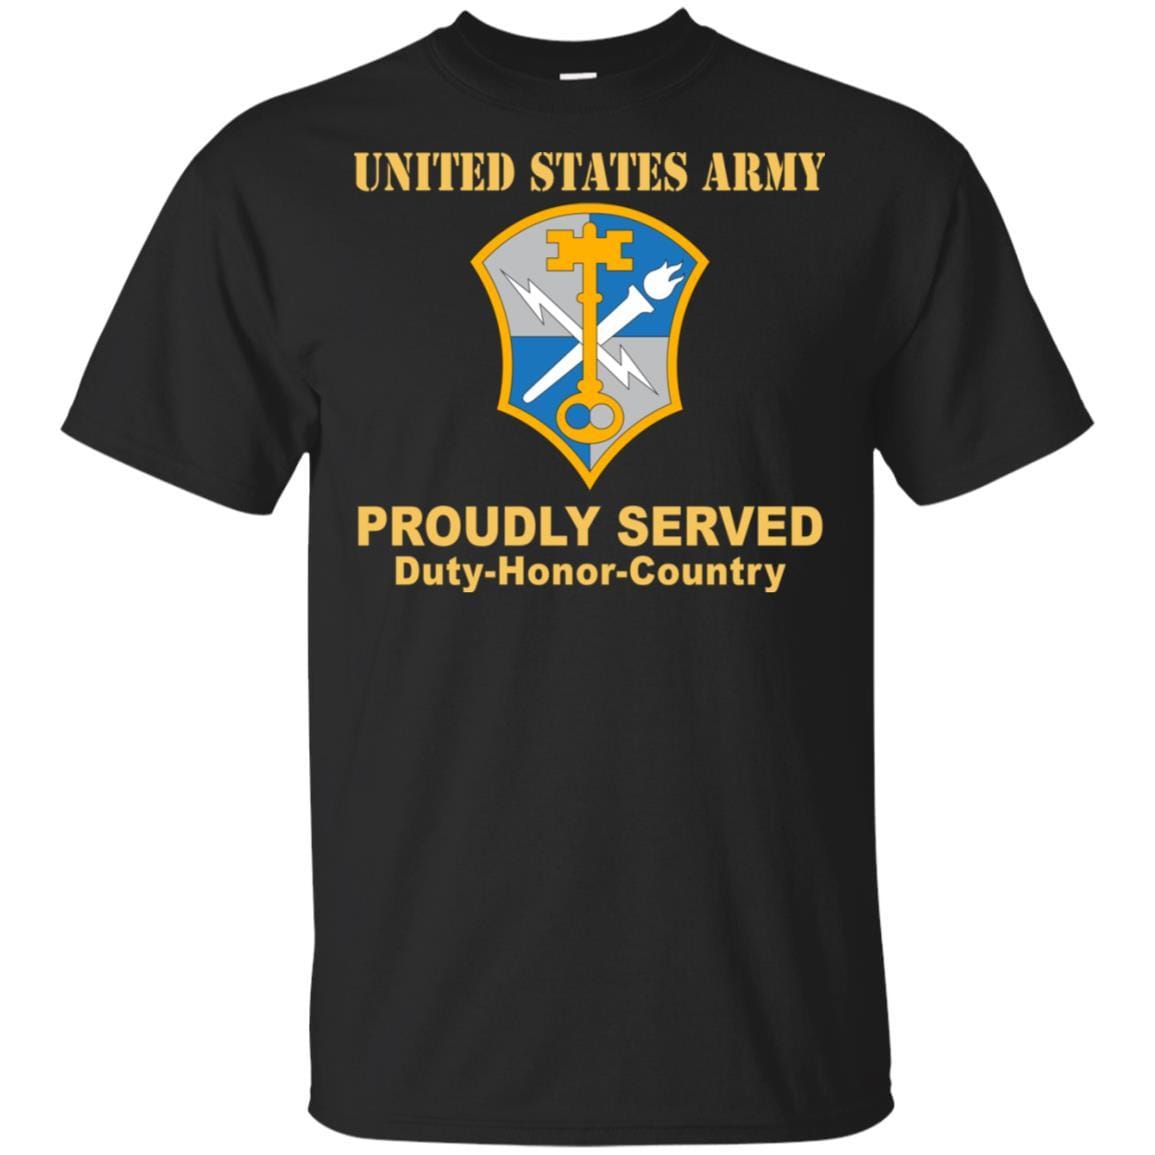 US ARMY CSIB INTELLIGENCE AND SECURITY COMMAND- Proudly Served T-Shirt On Front For Men-TShirt-Army-Veterans Nation